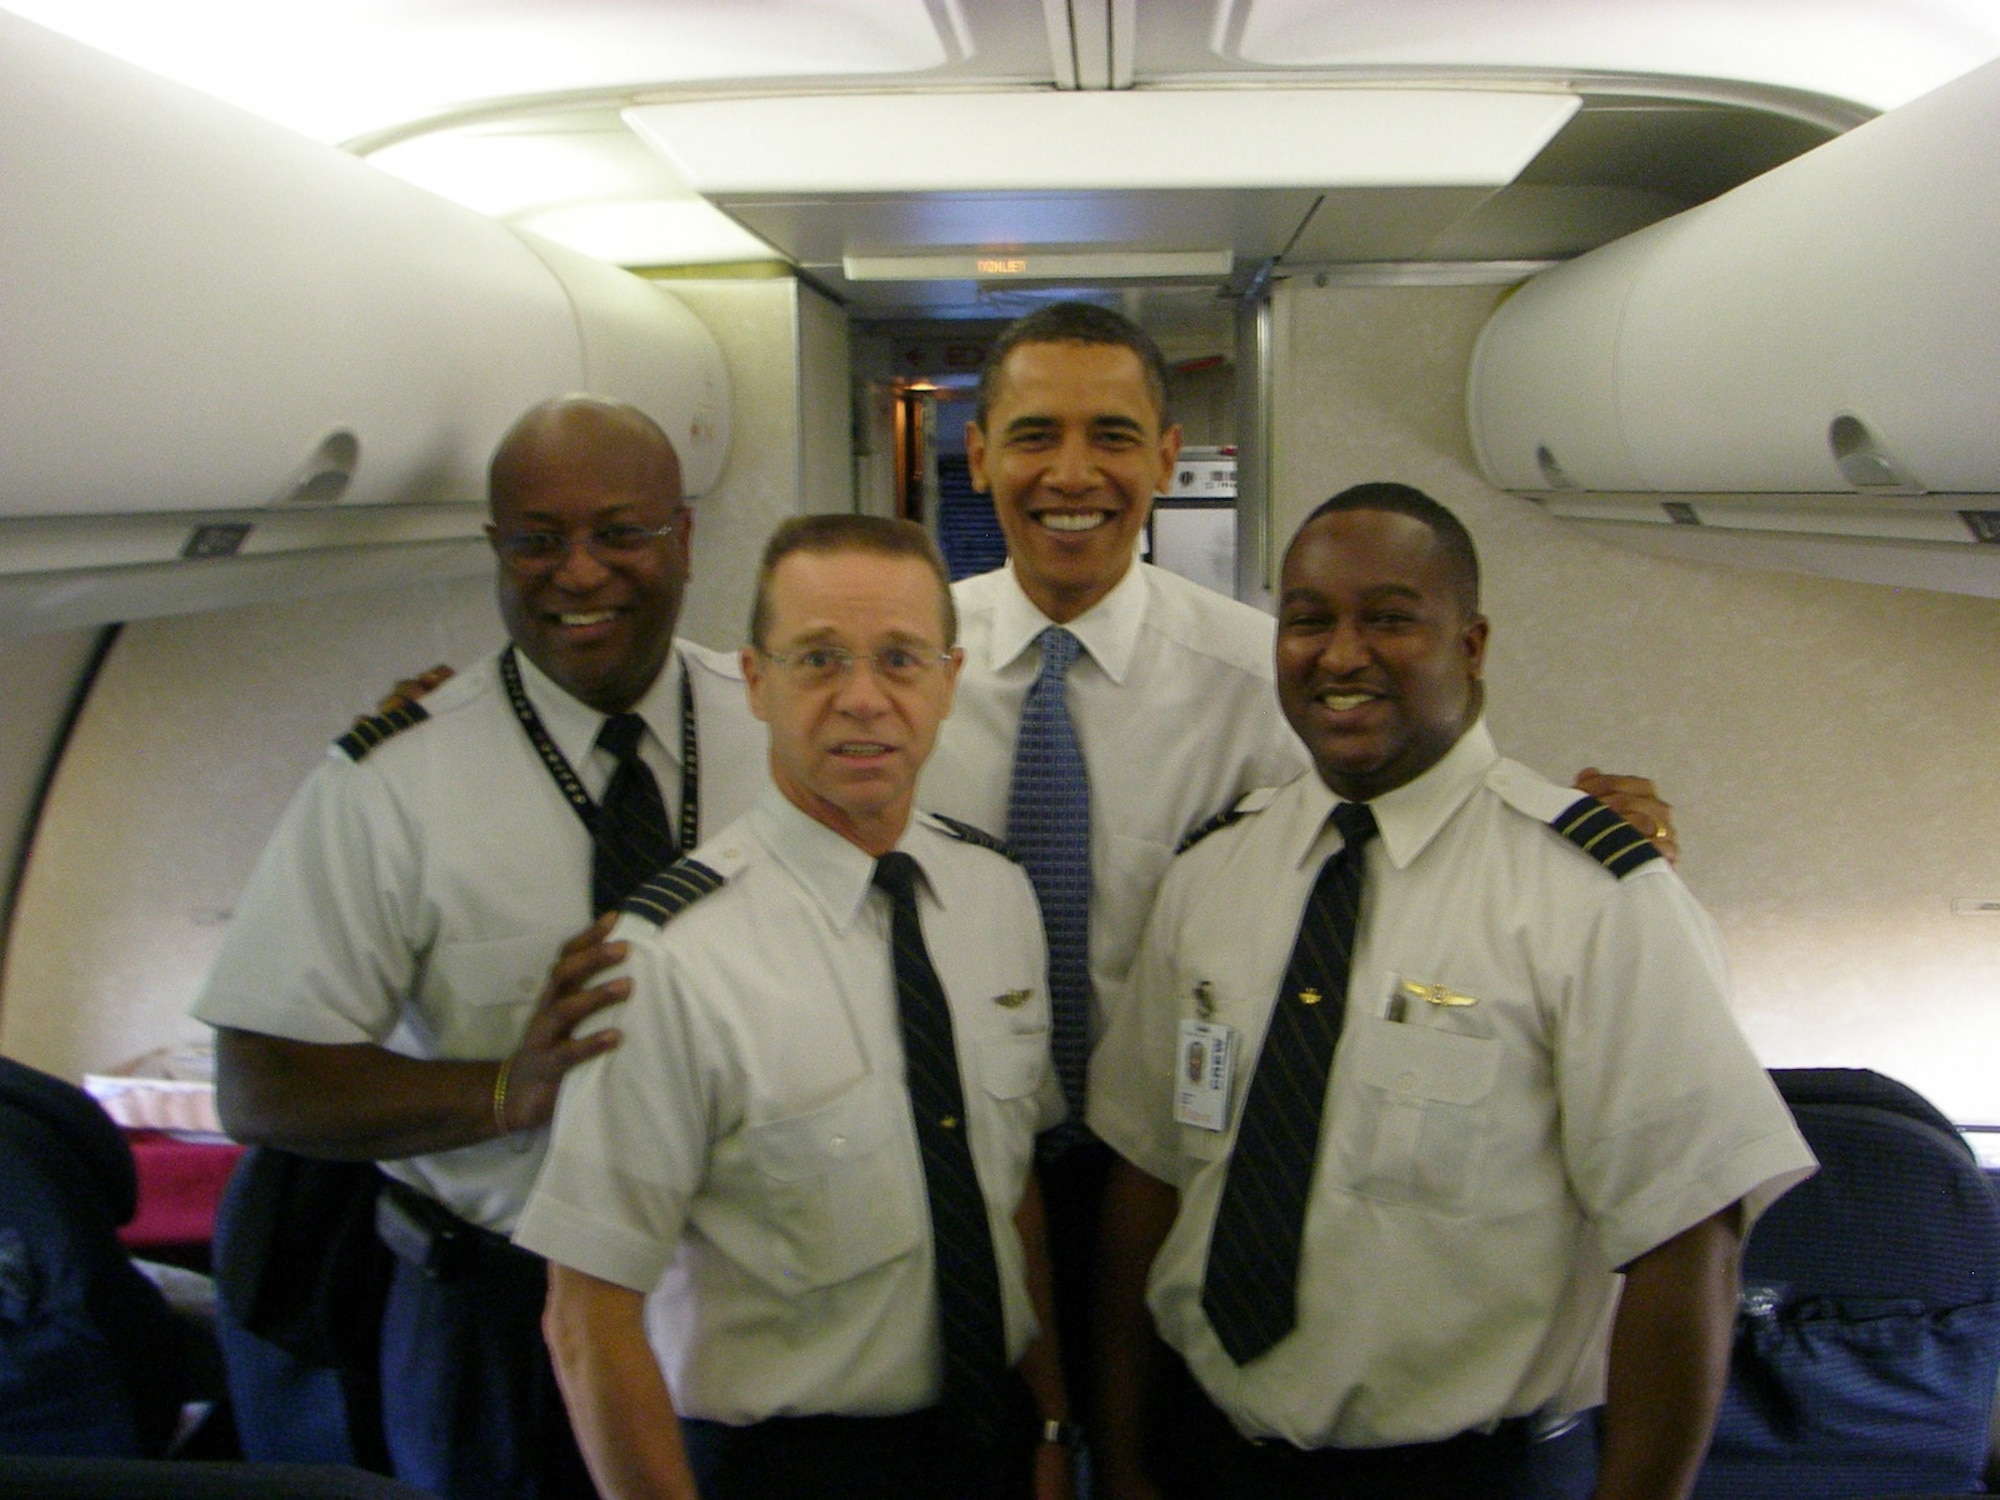 From left, Maj. Irby Rivera, Col. Pete Maynard, President-elect Barack Obama and Maj. Jon Bryant pose for the camera on Mr. Obama's last commercial charter flight before becoming president of the United States. All three military officers are Citizen Airmen and commercial airline pilots in civilian life. (Courtesy photo)

